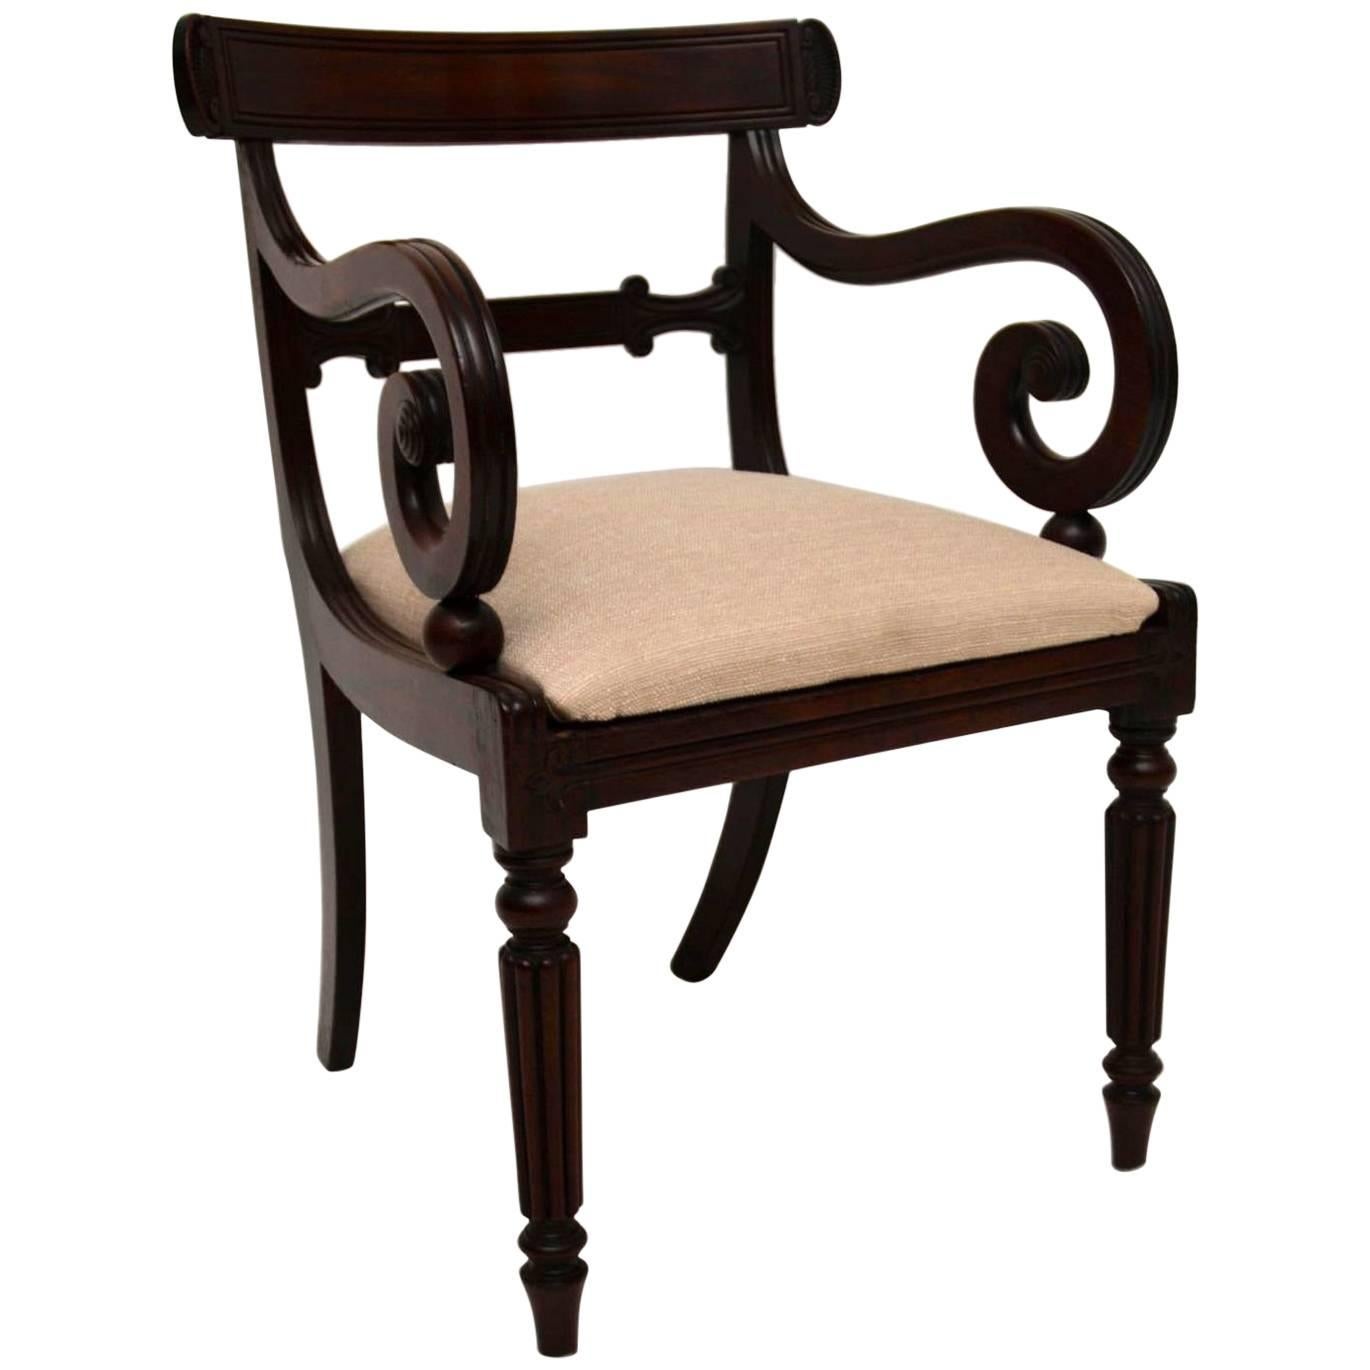 Antique William IV Mahogany Armchair or Desk Chair